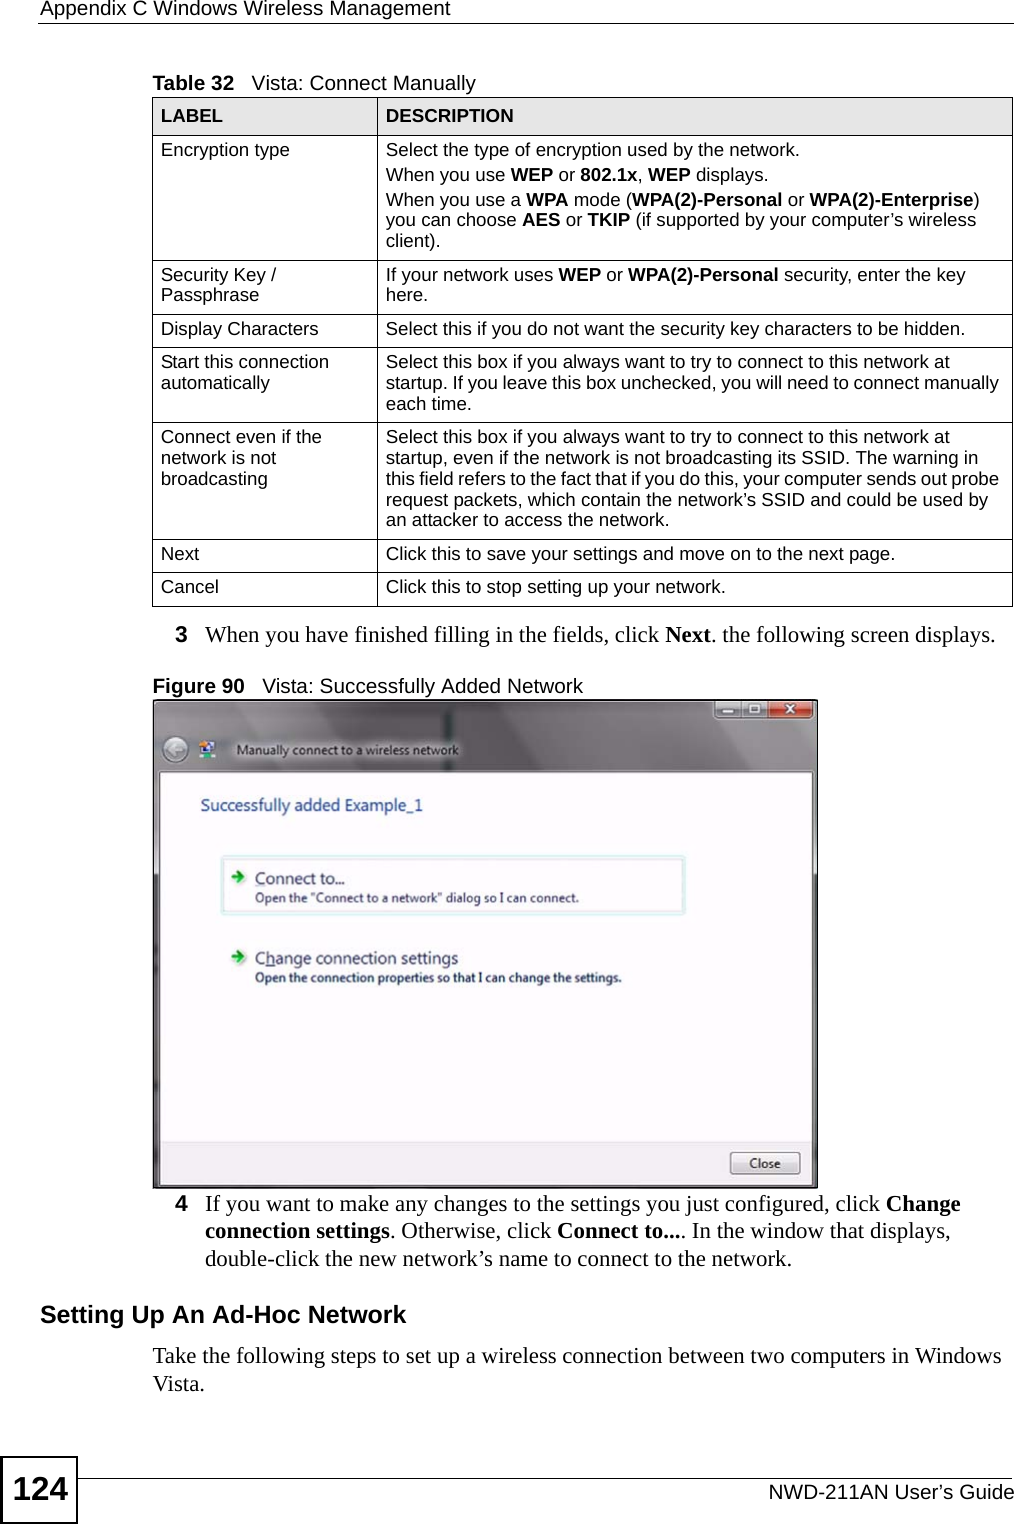 Appendix C Windows Wireless ManagementNWD-211AN User’s Guide1243When you have finished filling in the fields, click Next. the following screen displays.Figure 90   Vista: Successfully Added Network4If you want to make any changes to the settings you just configured, click Change connection settings. Otherwise, click Connect to.... In the window that displays, double-click the new network’s name to connect to the network.Setting Up An Ad-Hoc Network Take the following steps to set up a wireless connection between two computers in Windows Vista. Encryption type Select the type of encryption used by the network.When you use WEP or 802.1x, WEP displays.When you use a WPA mode (WPA(2)-Personal or WPA(2)-Enterprise) you can choose AES or TKIP (if supported by your computer’s wireless client).Security Key / Passphrase If your network uses WEP or WPA(2)-Personal security, enter the key here.Display Characters Select this if you do not want the security key characters to be hidden.Start this connection automatically Select this box if you always want to try to connect to this network at startup. If you leave this box unchecked, you will need to connect manually each time.Connect even if the network is not broadcastingSelect this box if you always want to try to connect to this network at startup, even if the network is not broadcasting its SSID. The warning in this field refers to the fact that if you do this, your computer sends out probe request packets, which contain the network’s SSID and could be used by an attacker to access the network.Next Click this to save your settings and move on to the next page.Cancel Click this to stop setting up your network.Table 32   Vista: Connect ManuallyLABEL DESCRIPTION